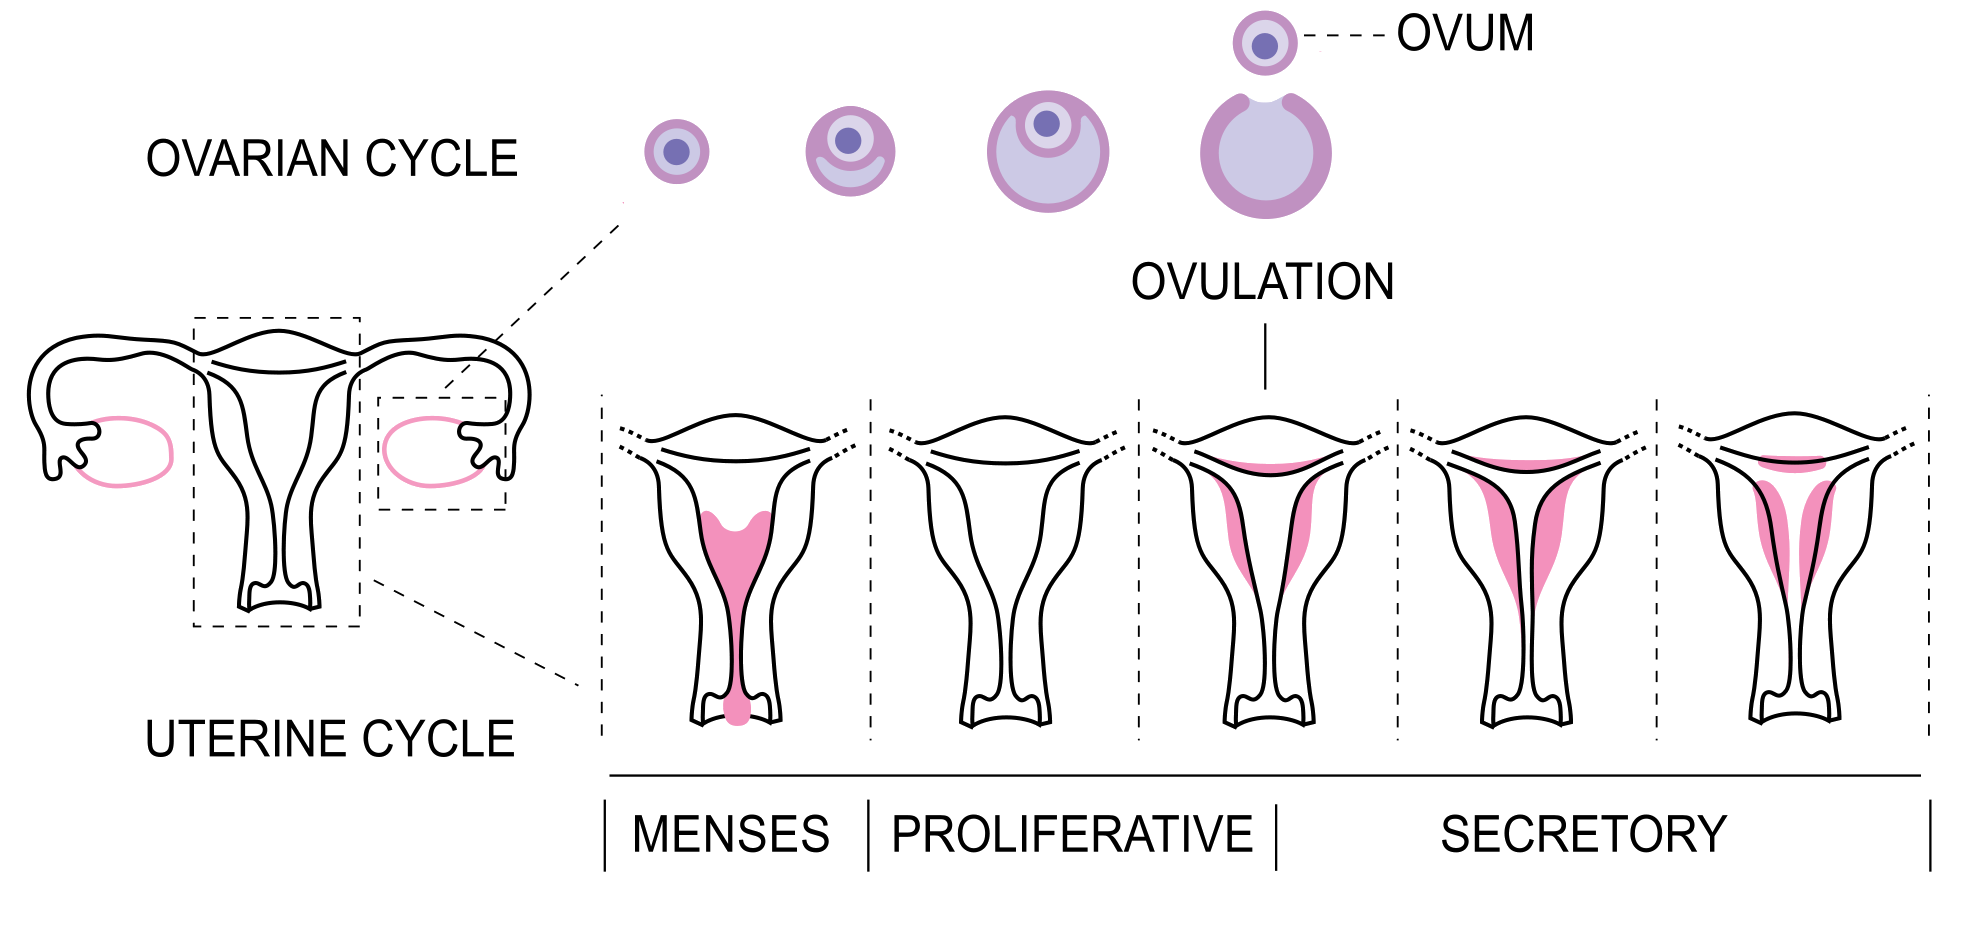 Changes in endometrium during the menstrual cycle. 